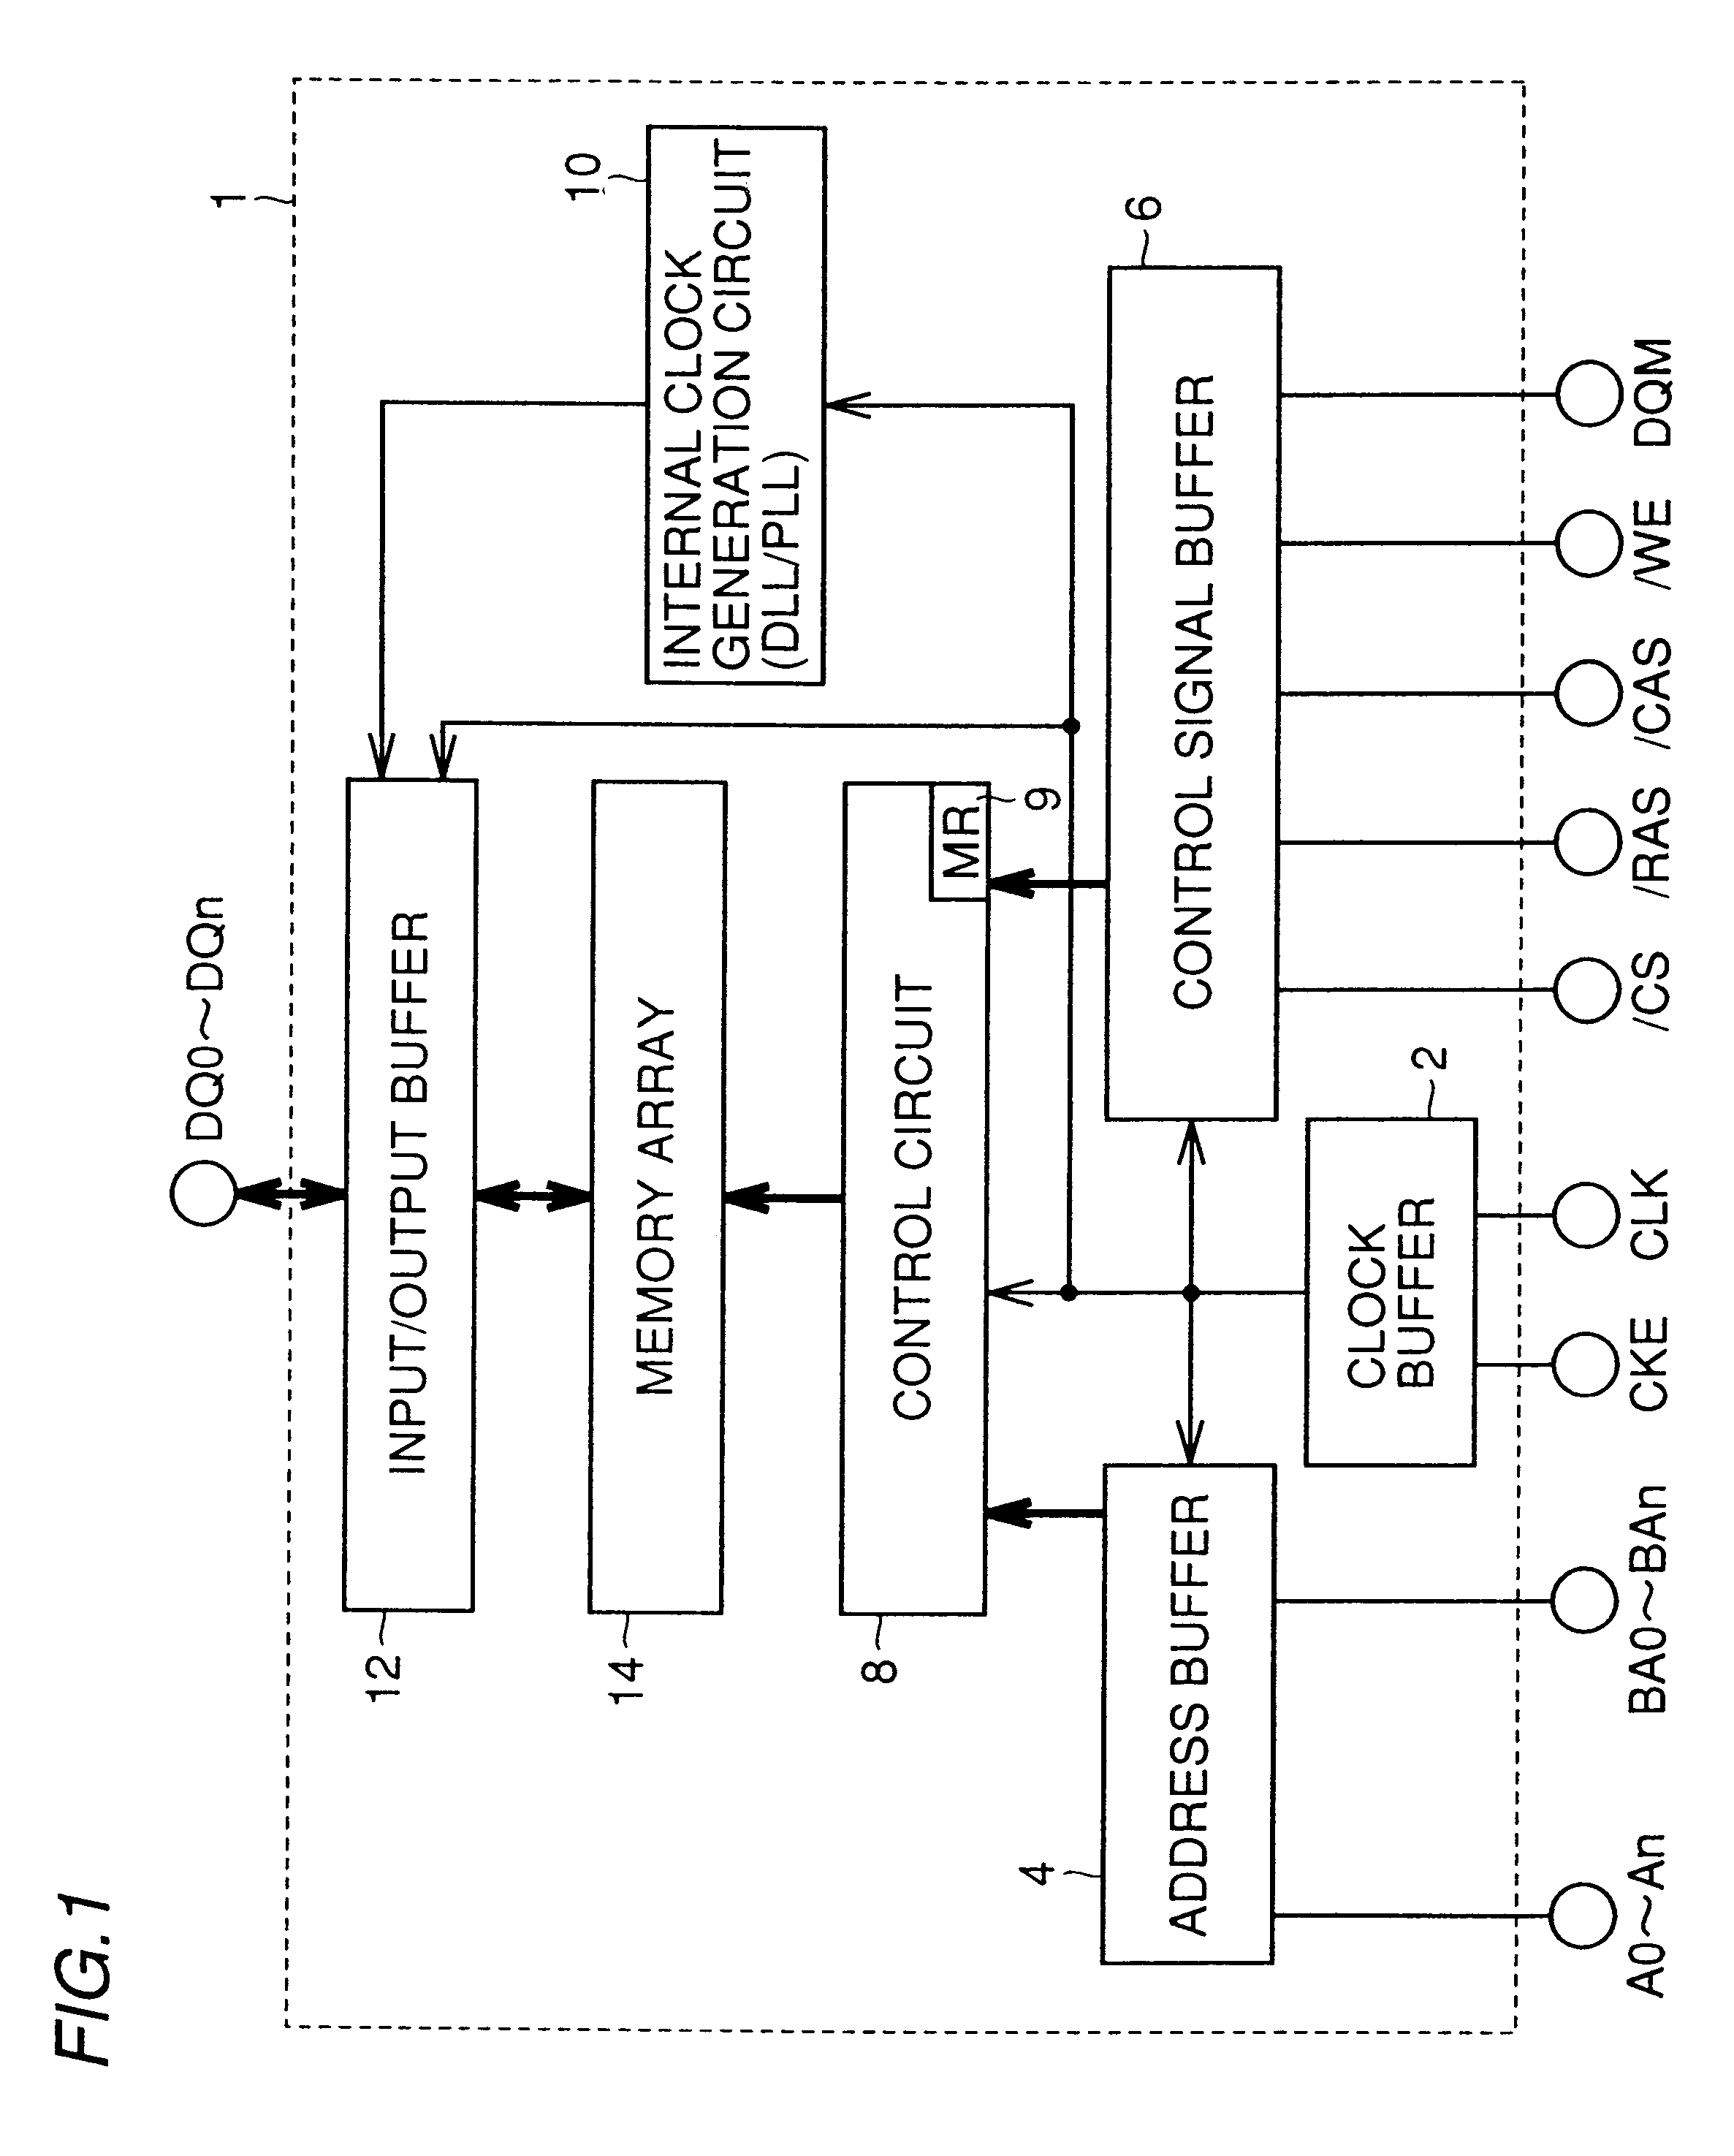 Semiconductor device capable of generating highly precise internal clock